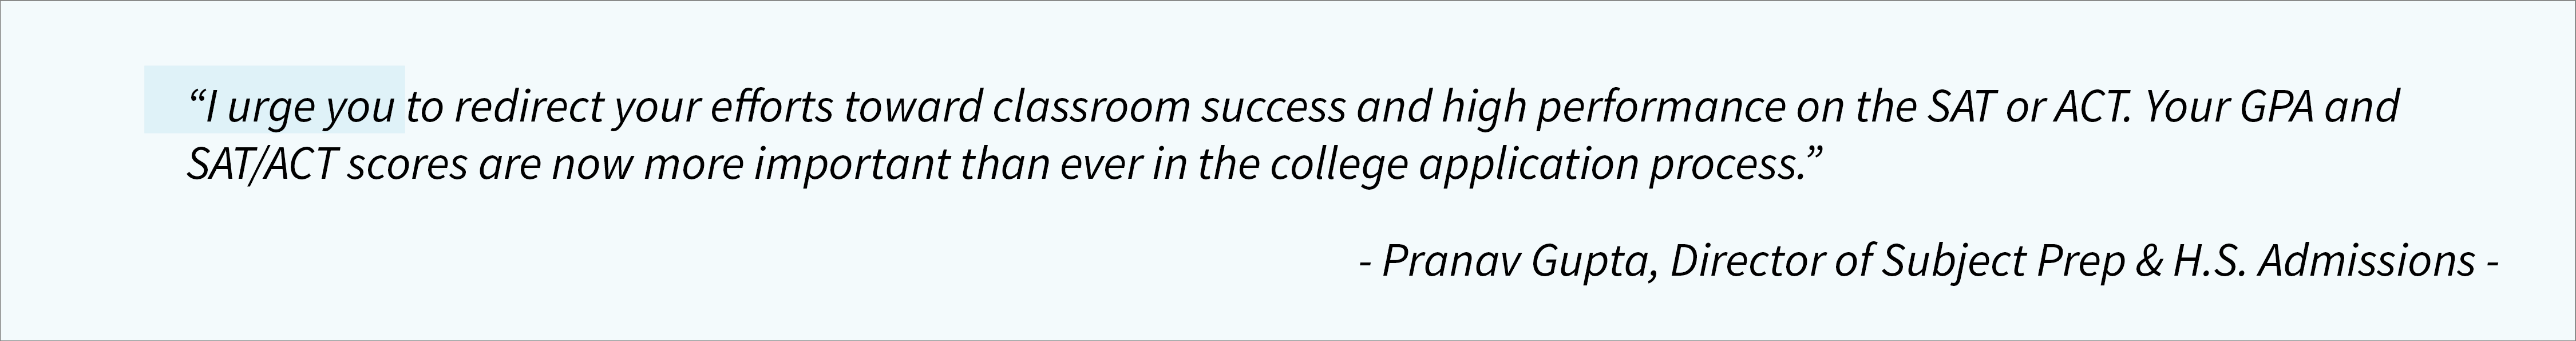 Quote from Pranav Gupta, Director of the Subject Prep & H.S. Admissions